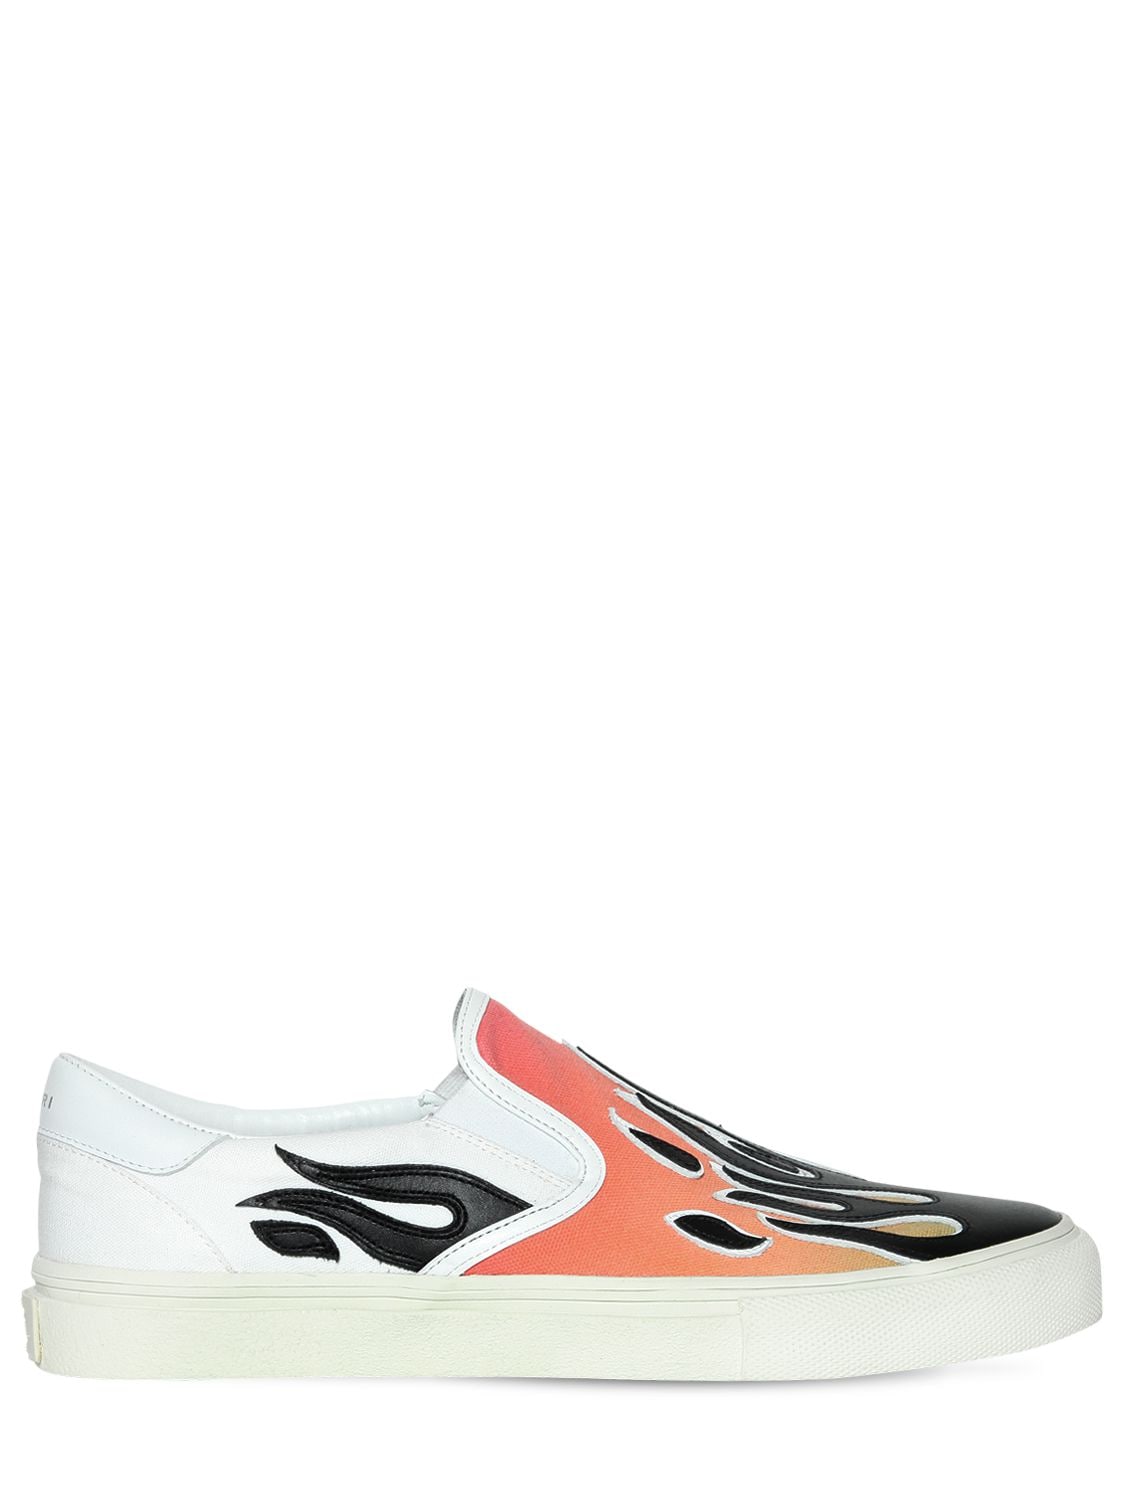 Flame Cotton Canvas Slip-on Sneakers